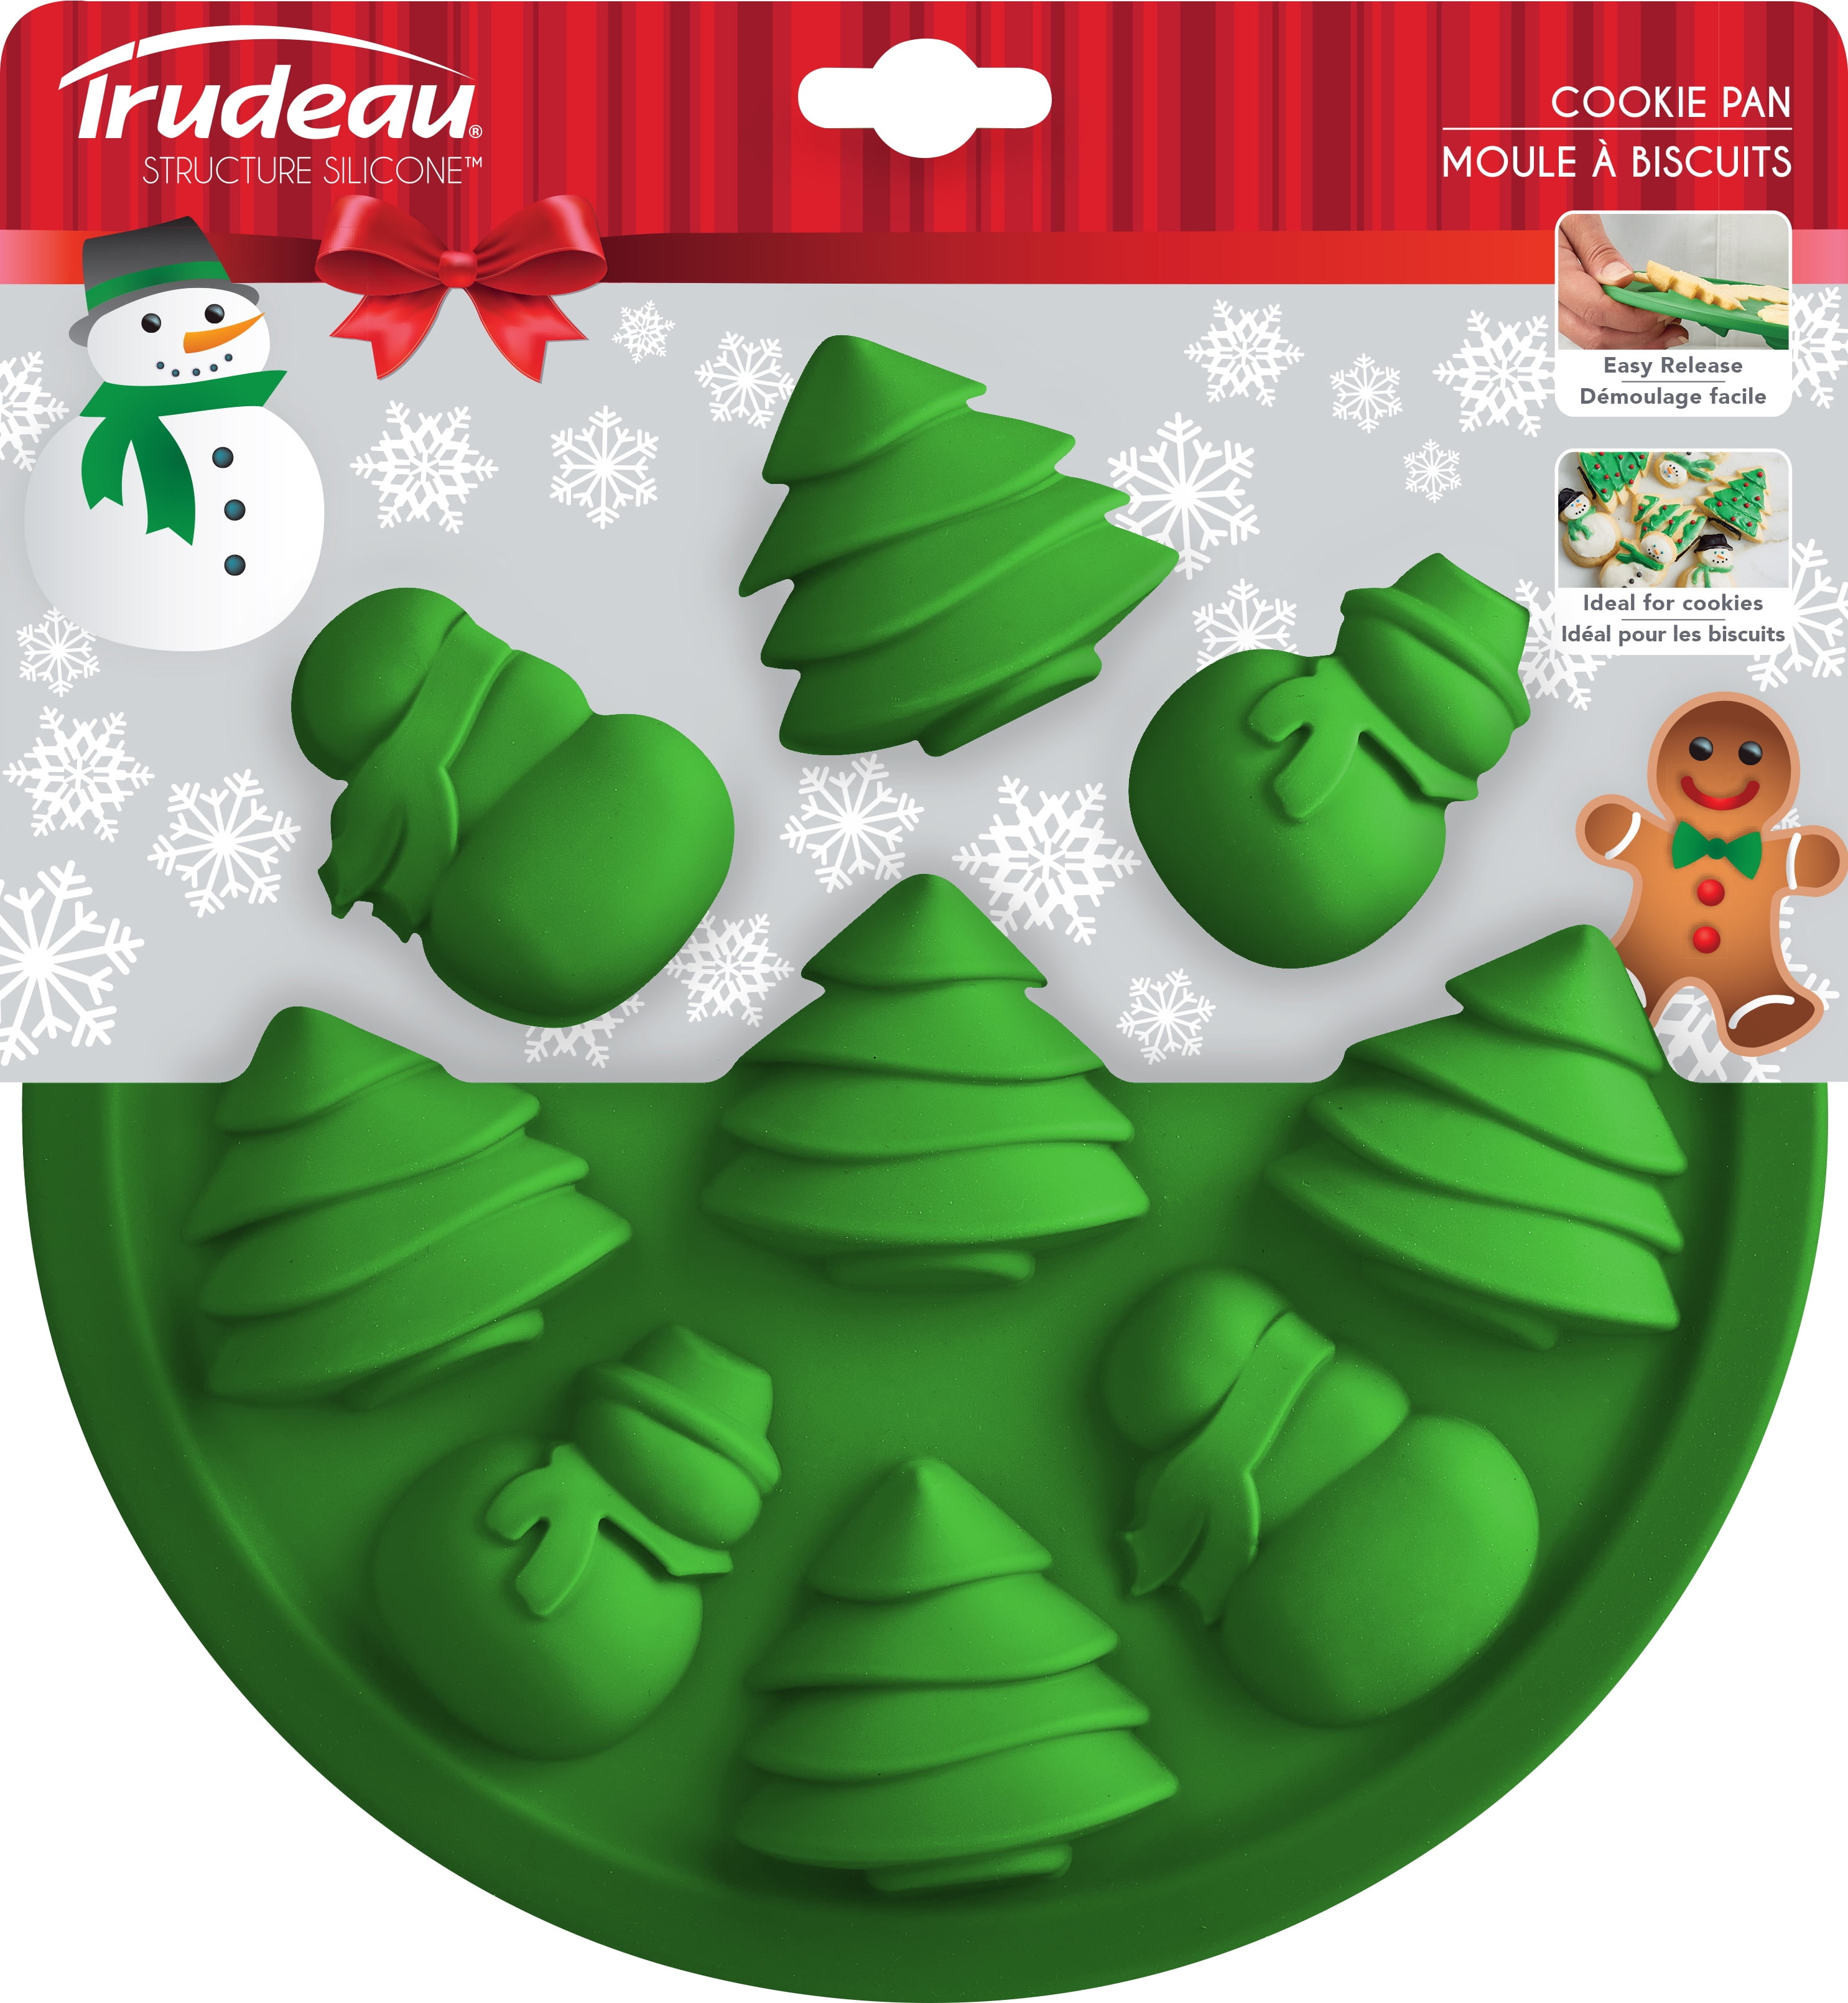 Trudeau Christmas Tree and Snowman Muffin Cake Pan, Structured Silicone, 9  Round 